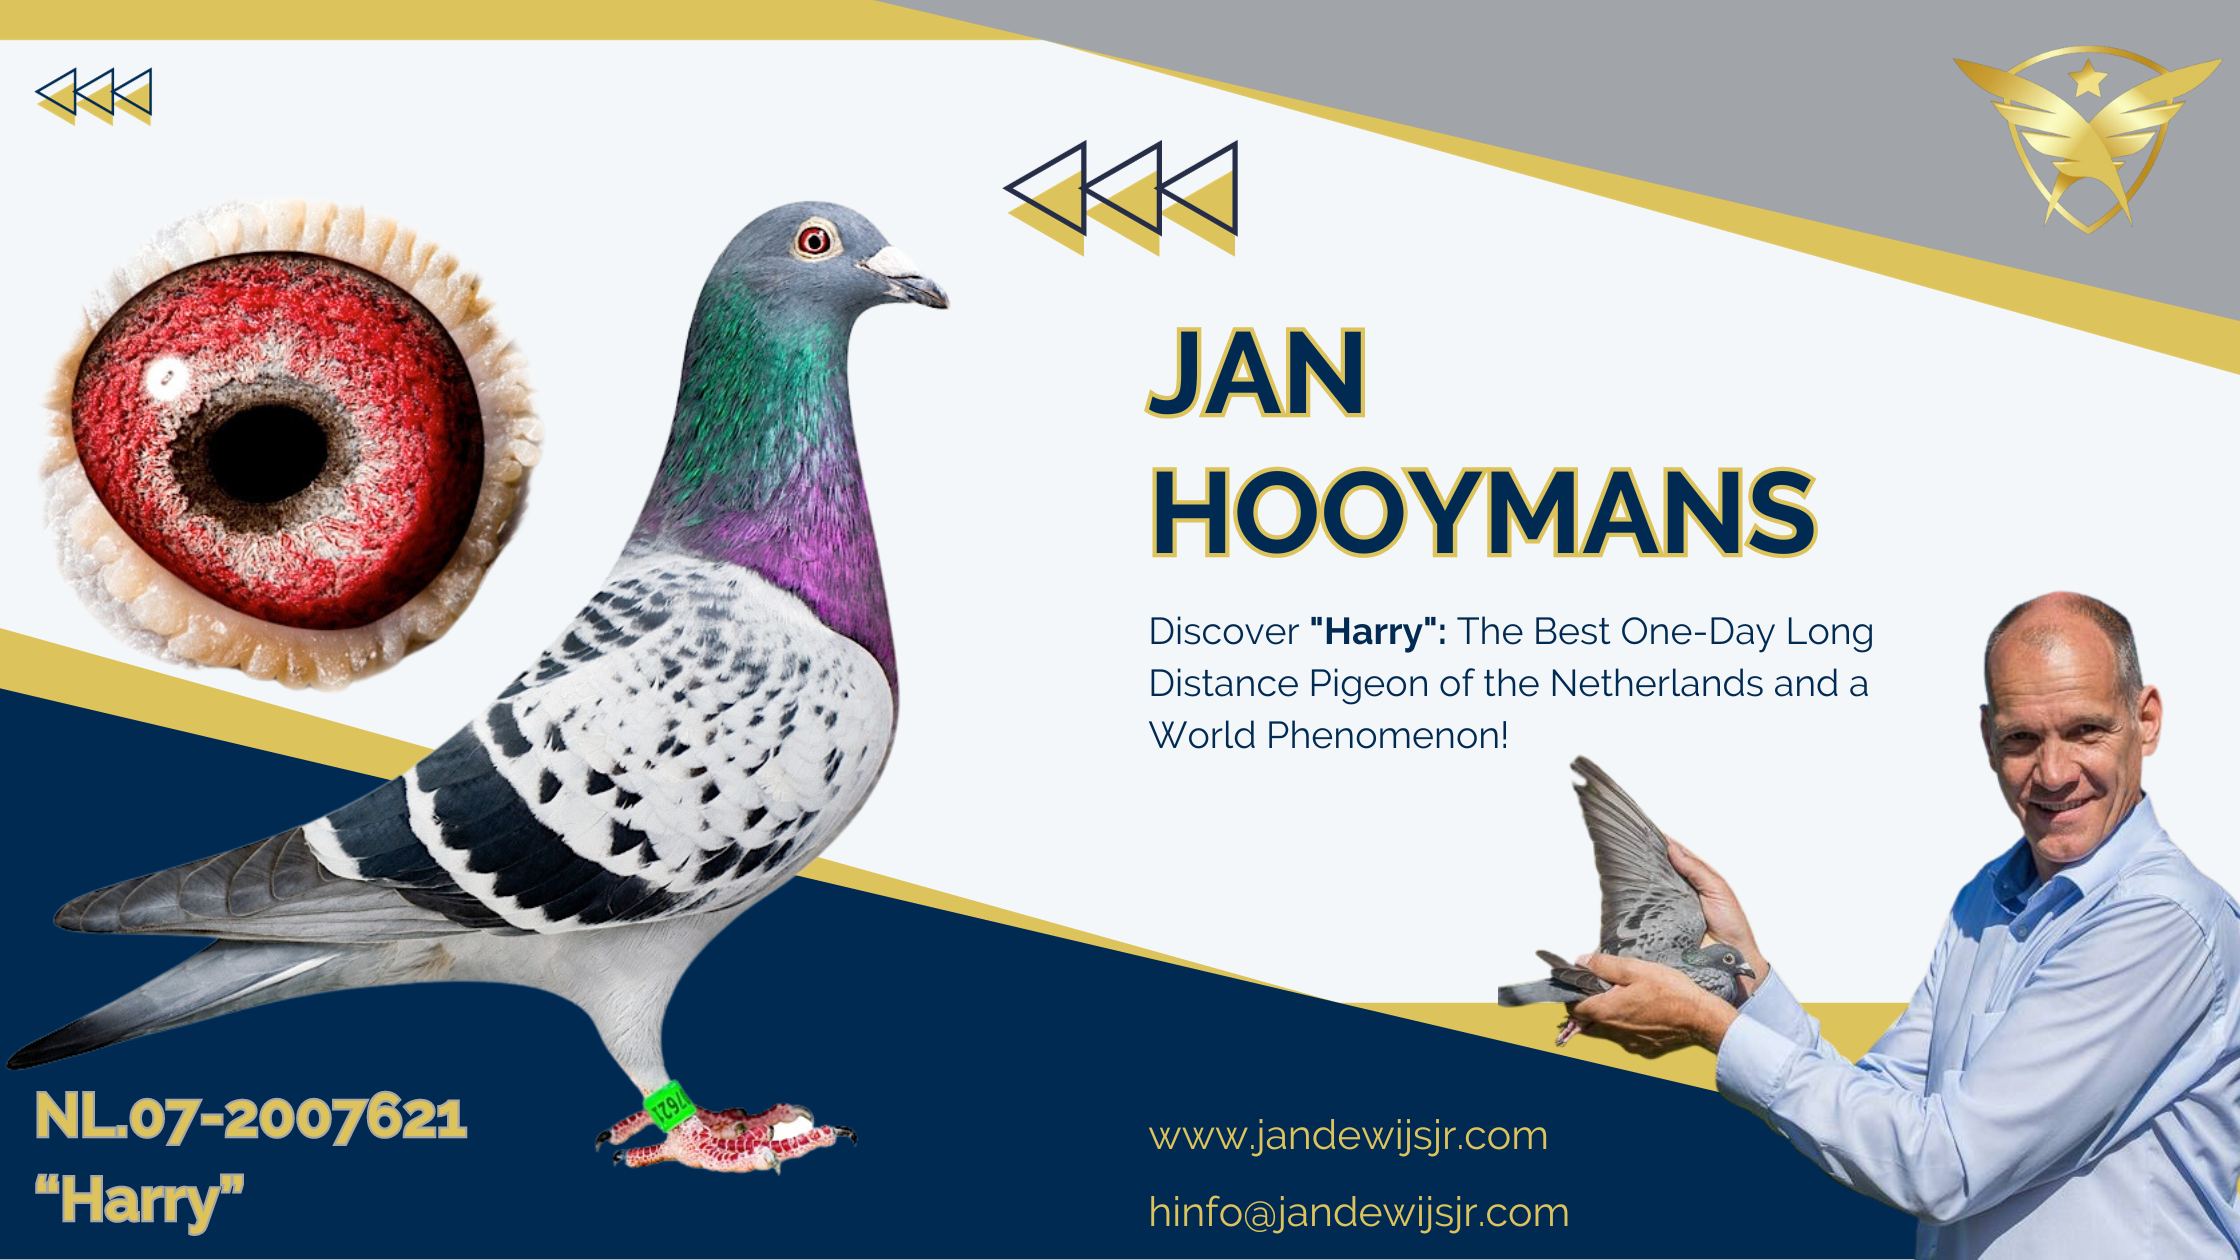 The Phenomenon “Harry”: The Best One-Day Long Distance Pigeon Ever from All of the Netherlands!